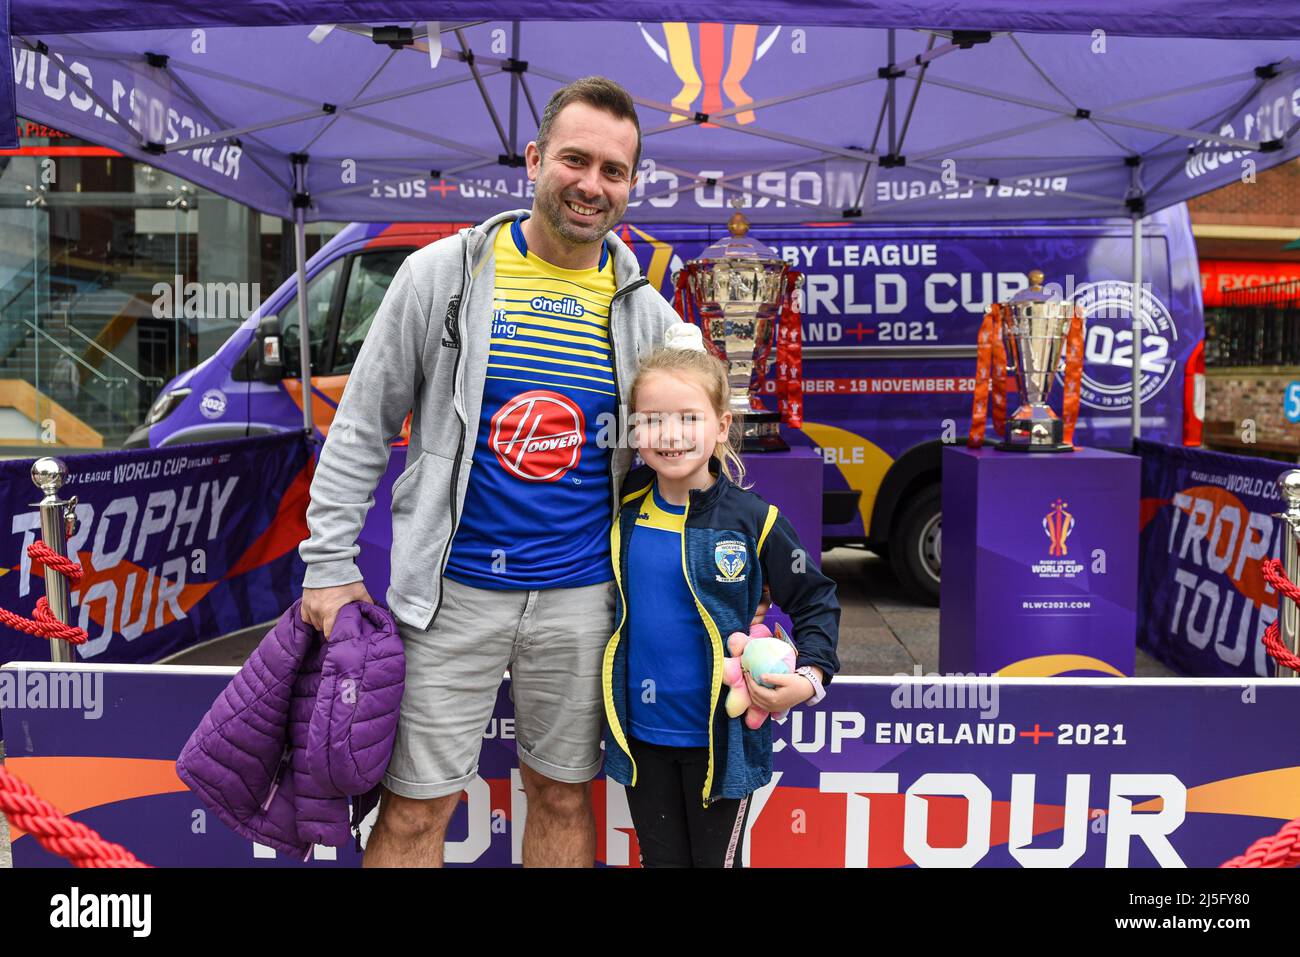 Warrington, UK. 23rd Apr, 2022. Some Warrington Wolves fans pose for photos next to the Rugby League World Cup Trophies in the fan zone before the game in Warrington, United Kingdom on 4/23/2022. (Photo by Simon Whitehead/News Images/Sipa USA) Credit: Sipa USA/Alamy Live News Stock Photo